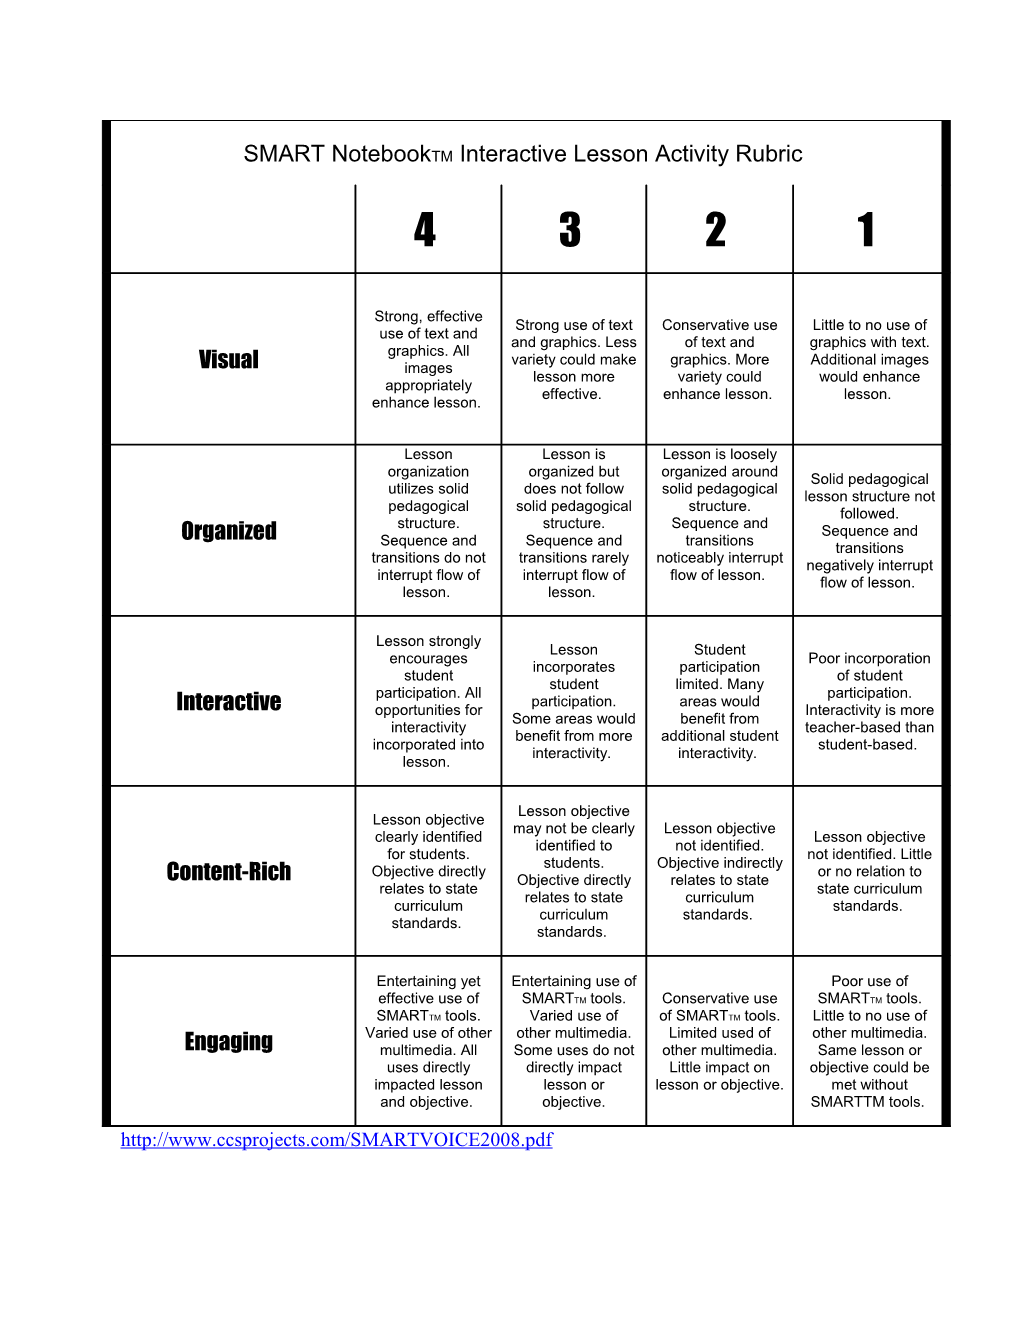 SMART Notebooktm Interactive Lesson Activity Rubric